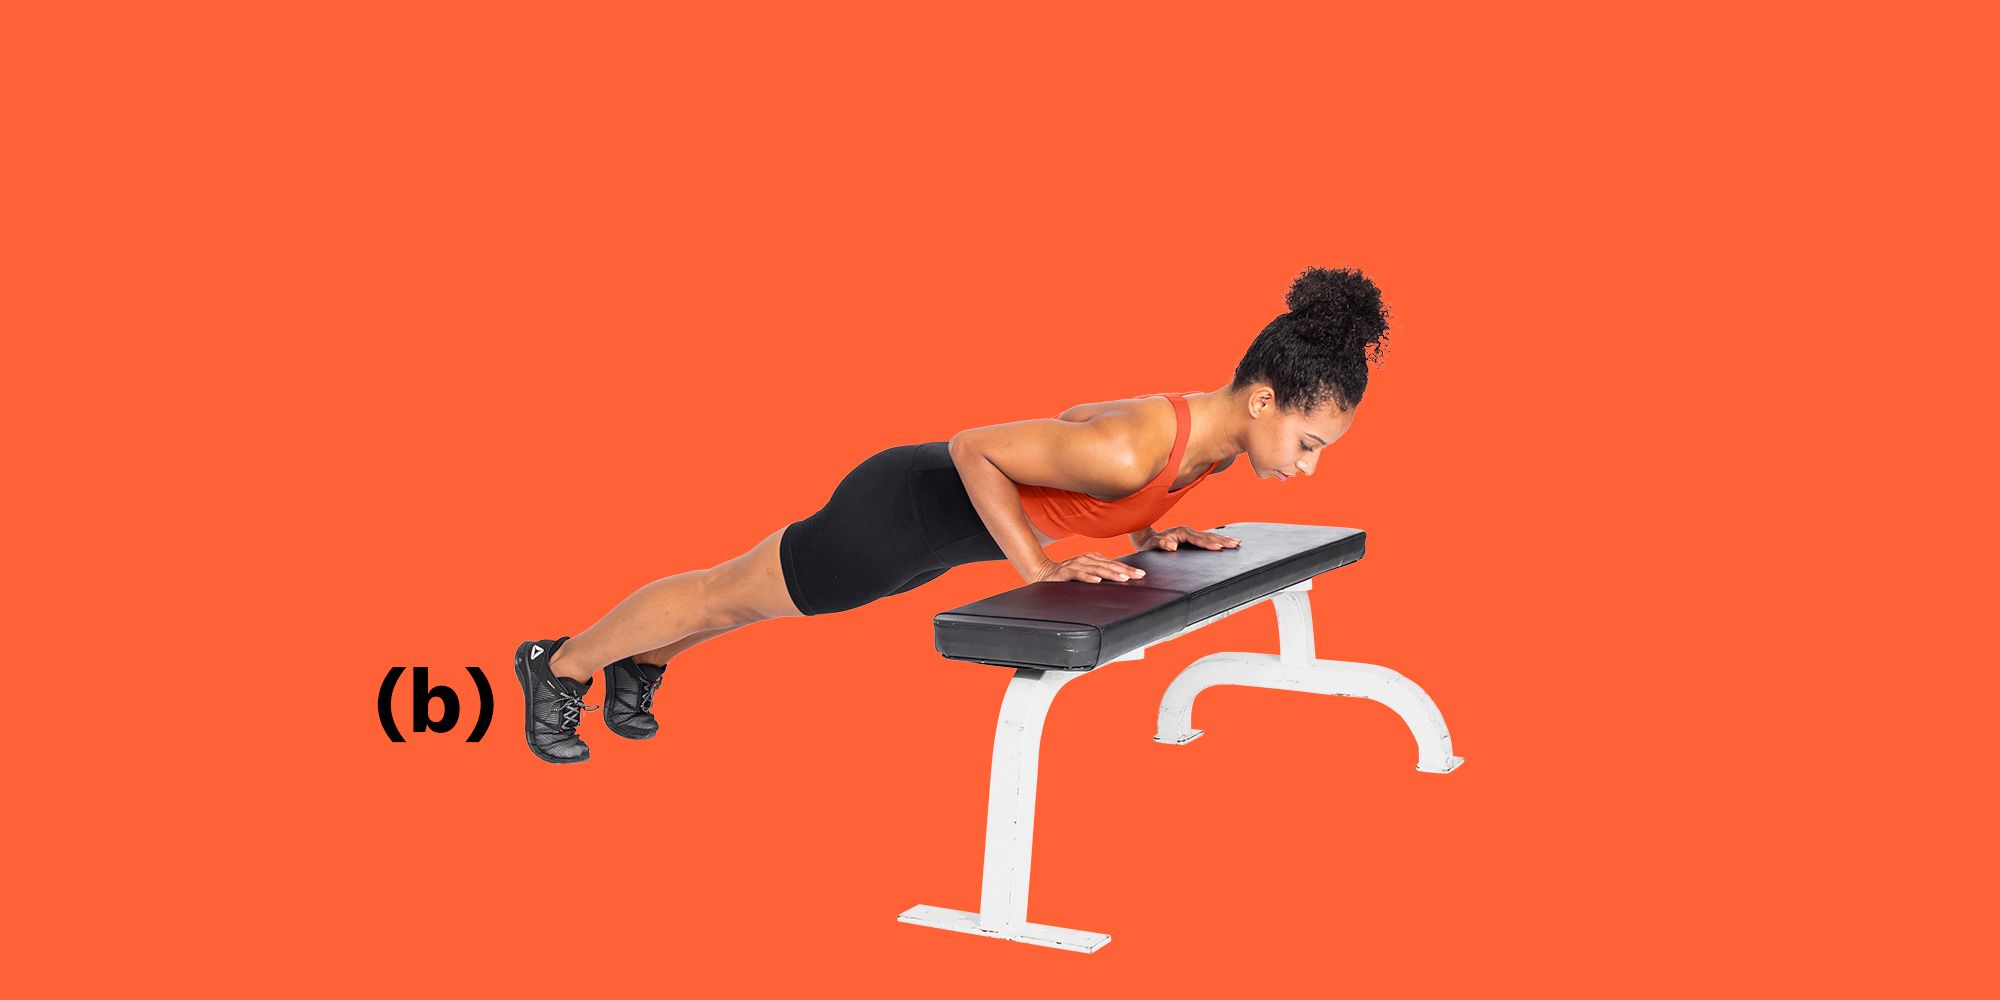 Incline Push-Ups Could Finally Help You Master the Full Move